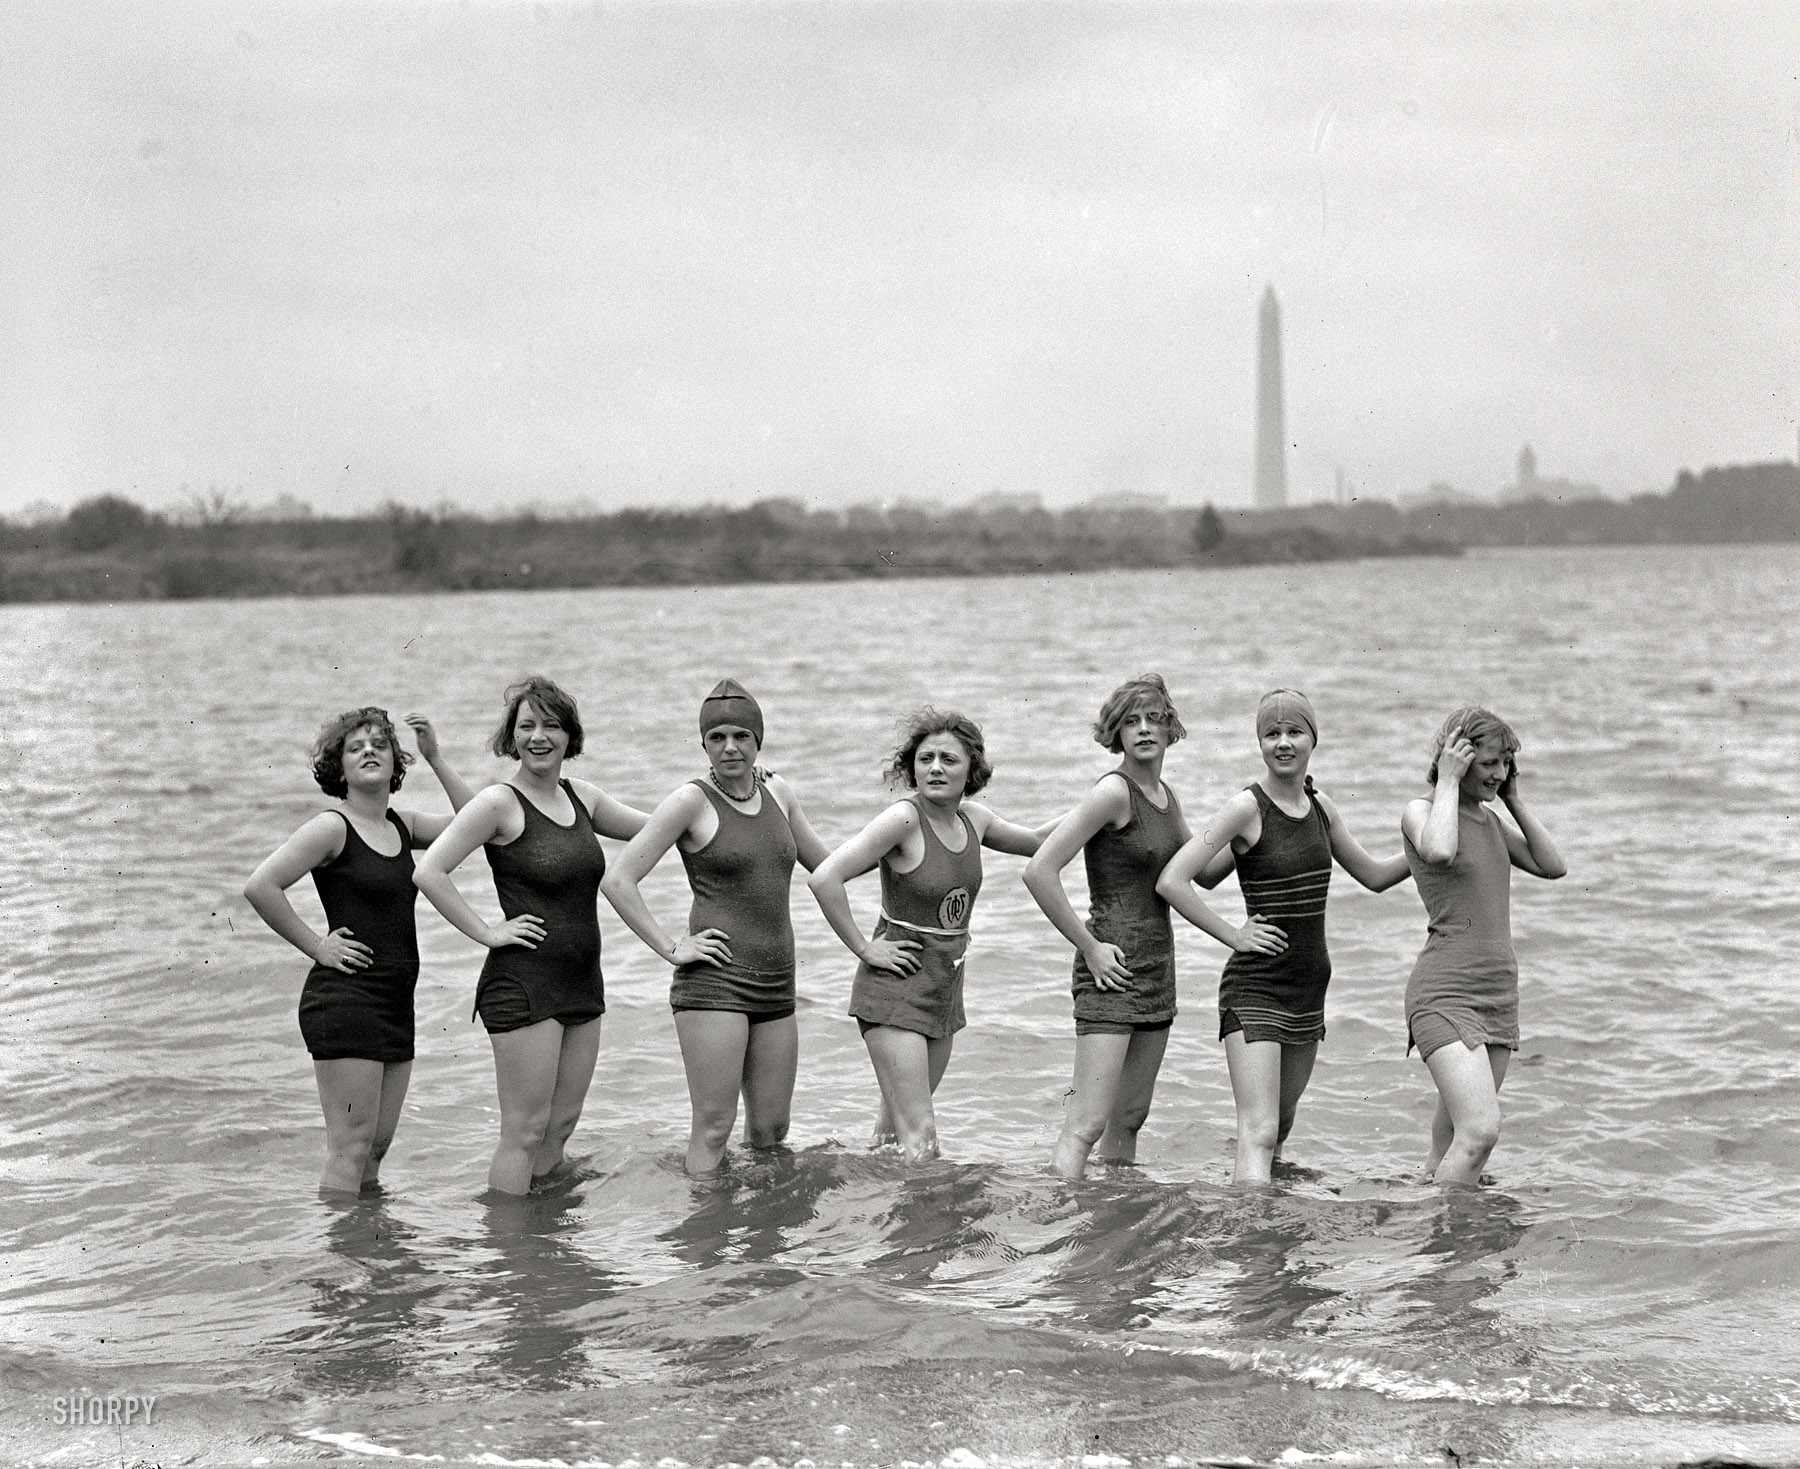 Washington, D.C. April 29, 1925. "Girls from Keith's at Arlington Beach." Showgirls from the local B.F. Keith vaudeville house taking a dip in nippy weather. National Photo Company Collection glass negative. View full size.